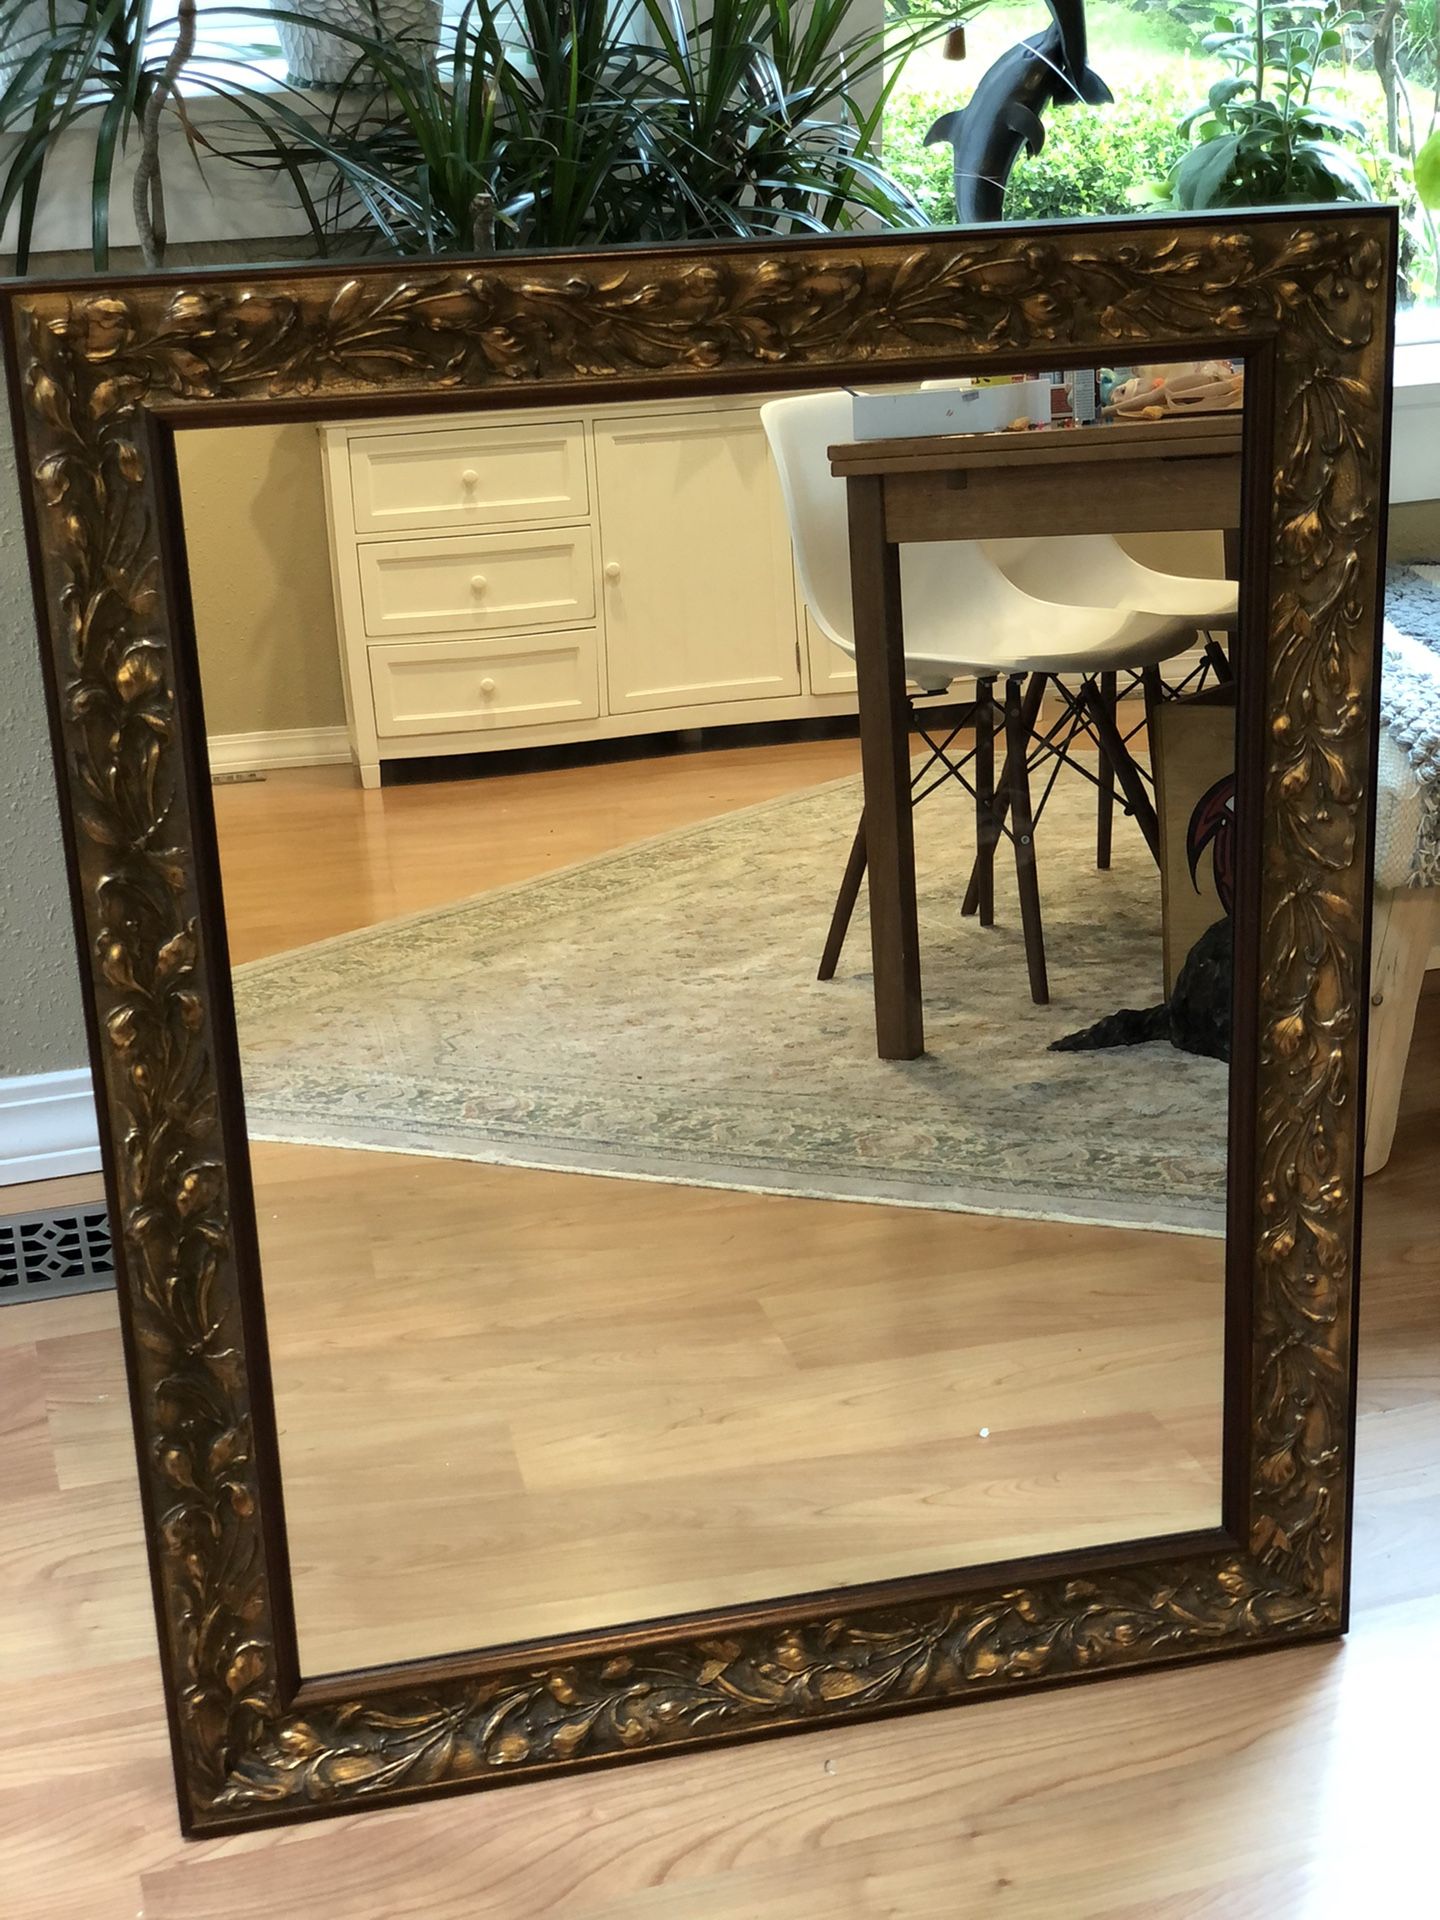 30” x 36” mirror for sale